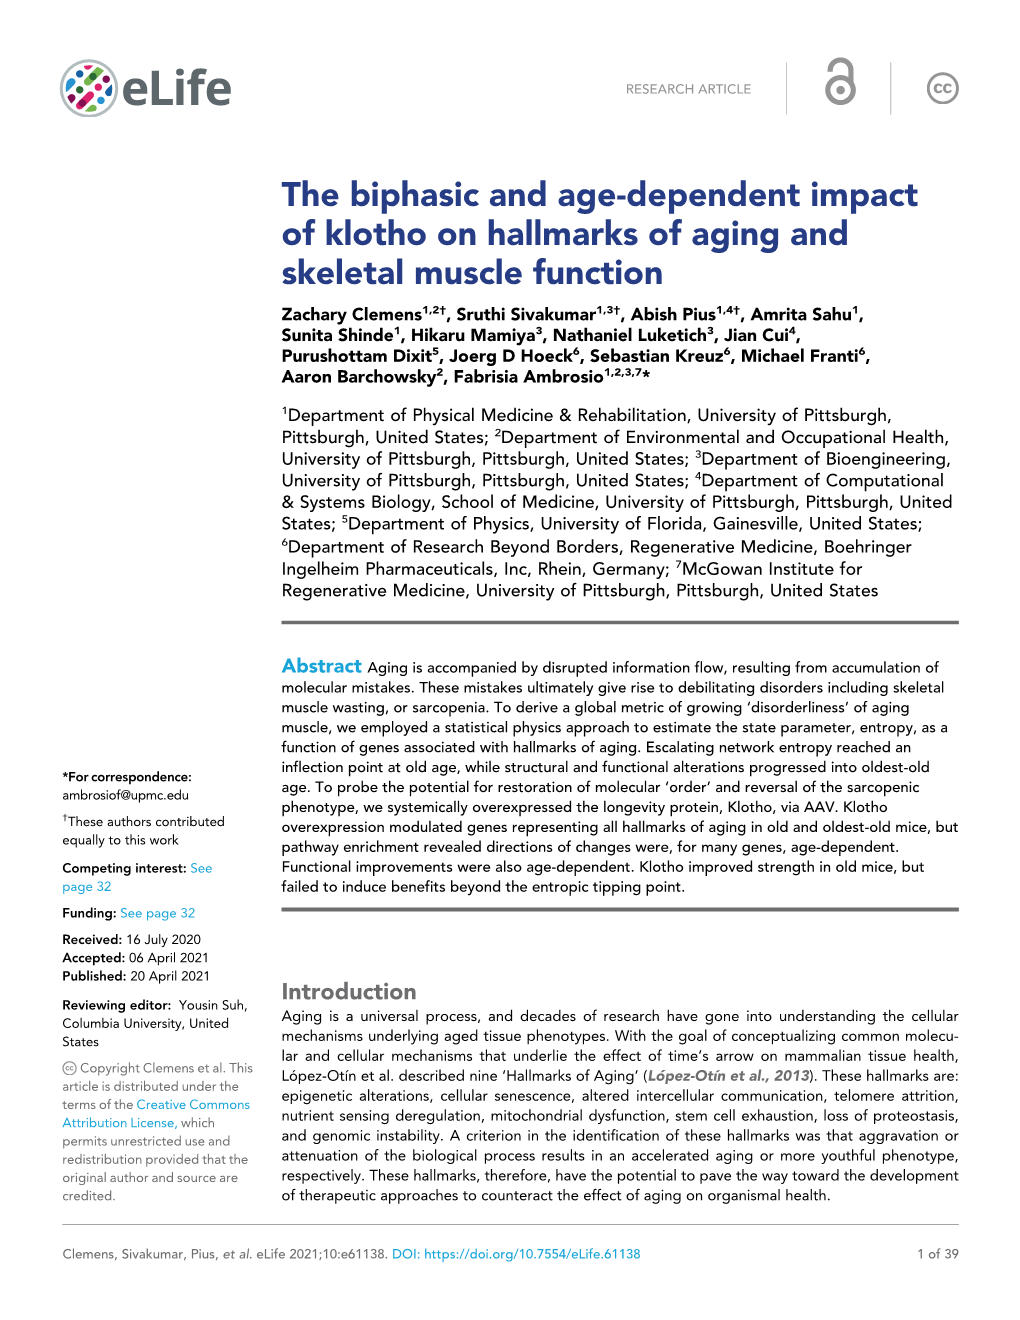 The Biphasic and Age-Dependent Impact of Klotho on Hallmarks